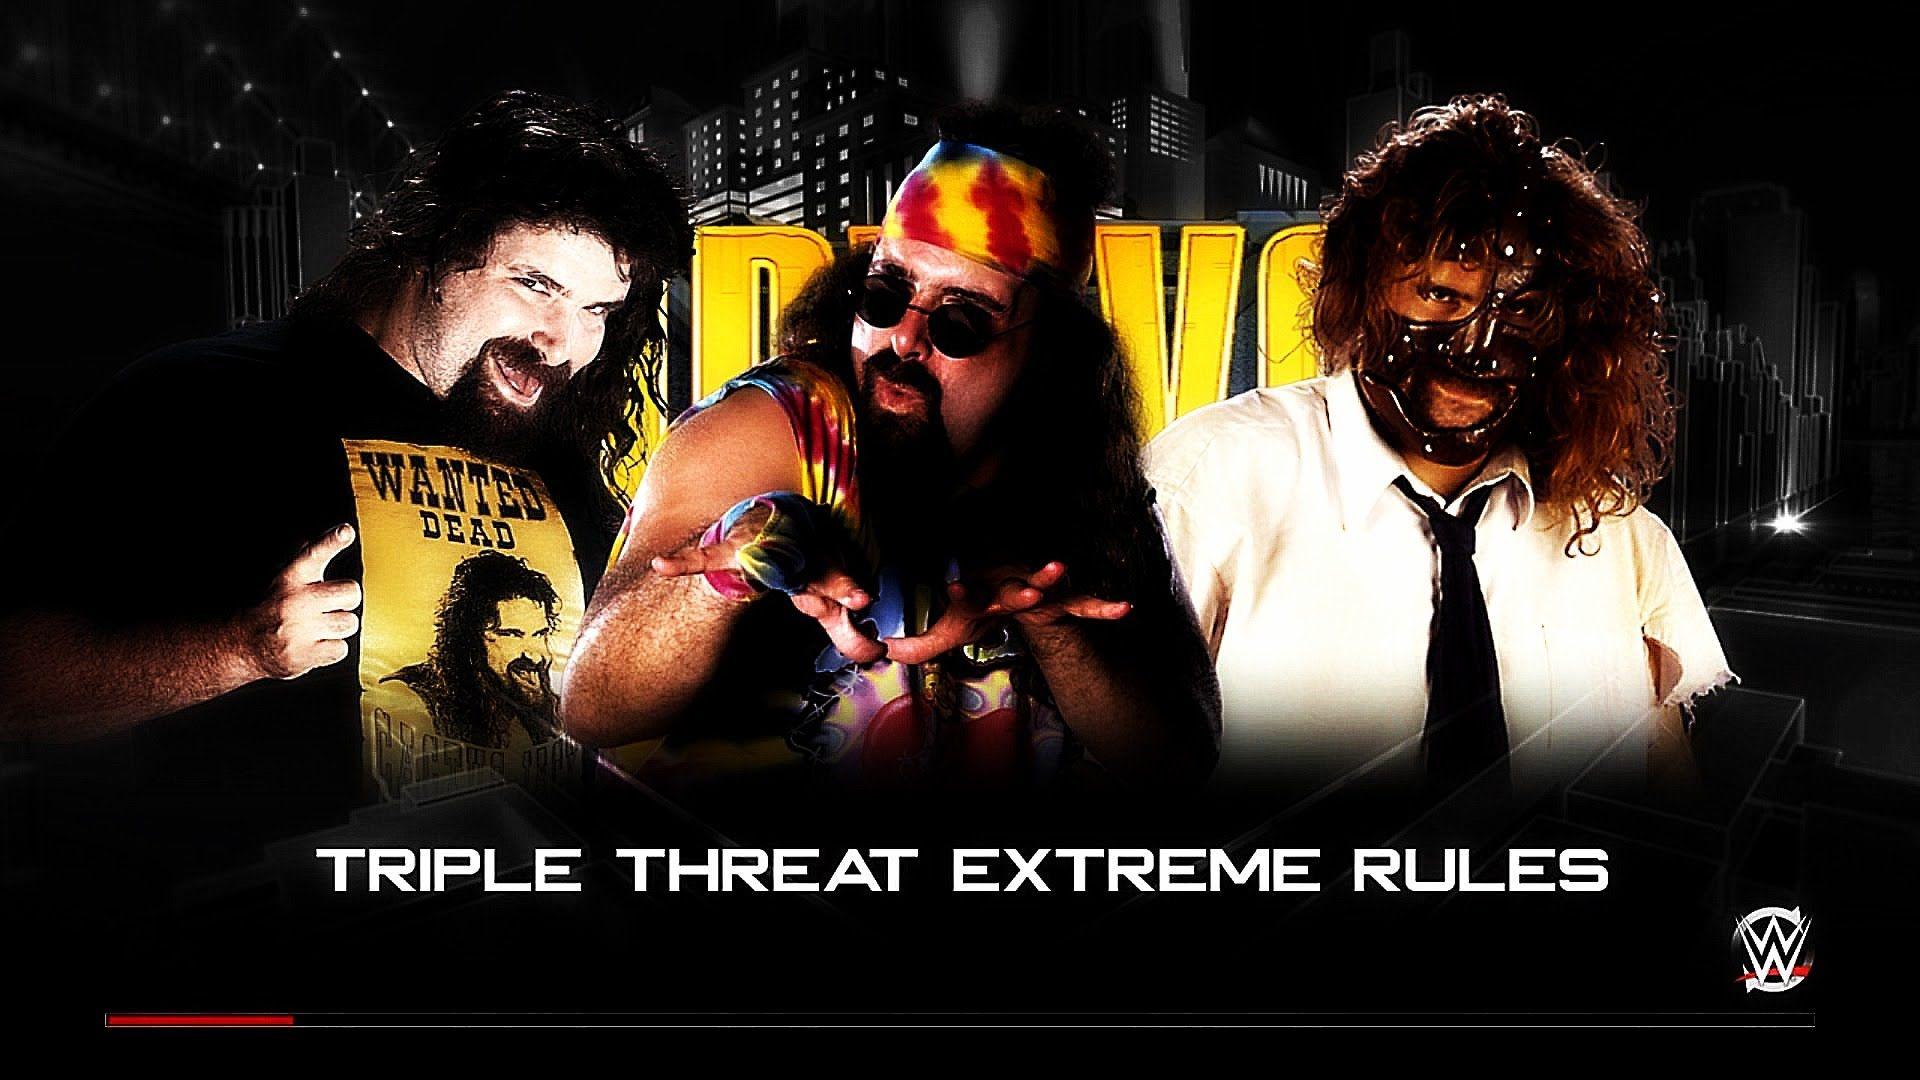 Triple Threat Extreme Rules Match, Dude Love vs Mankind vs Cactus